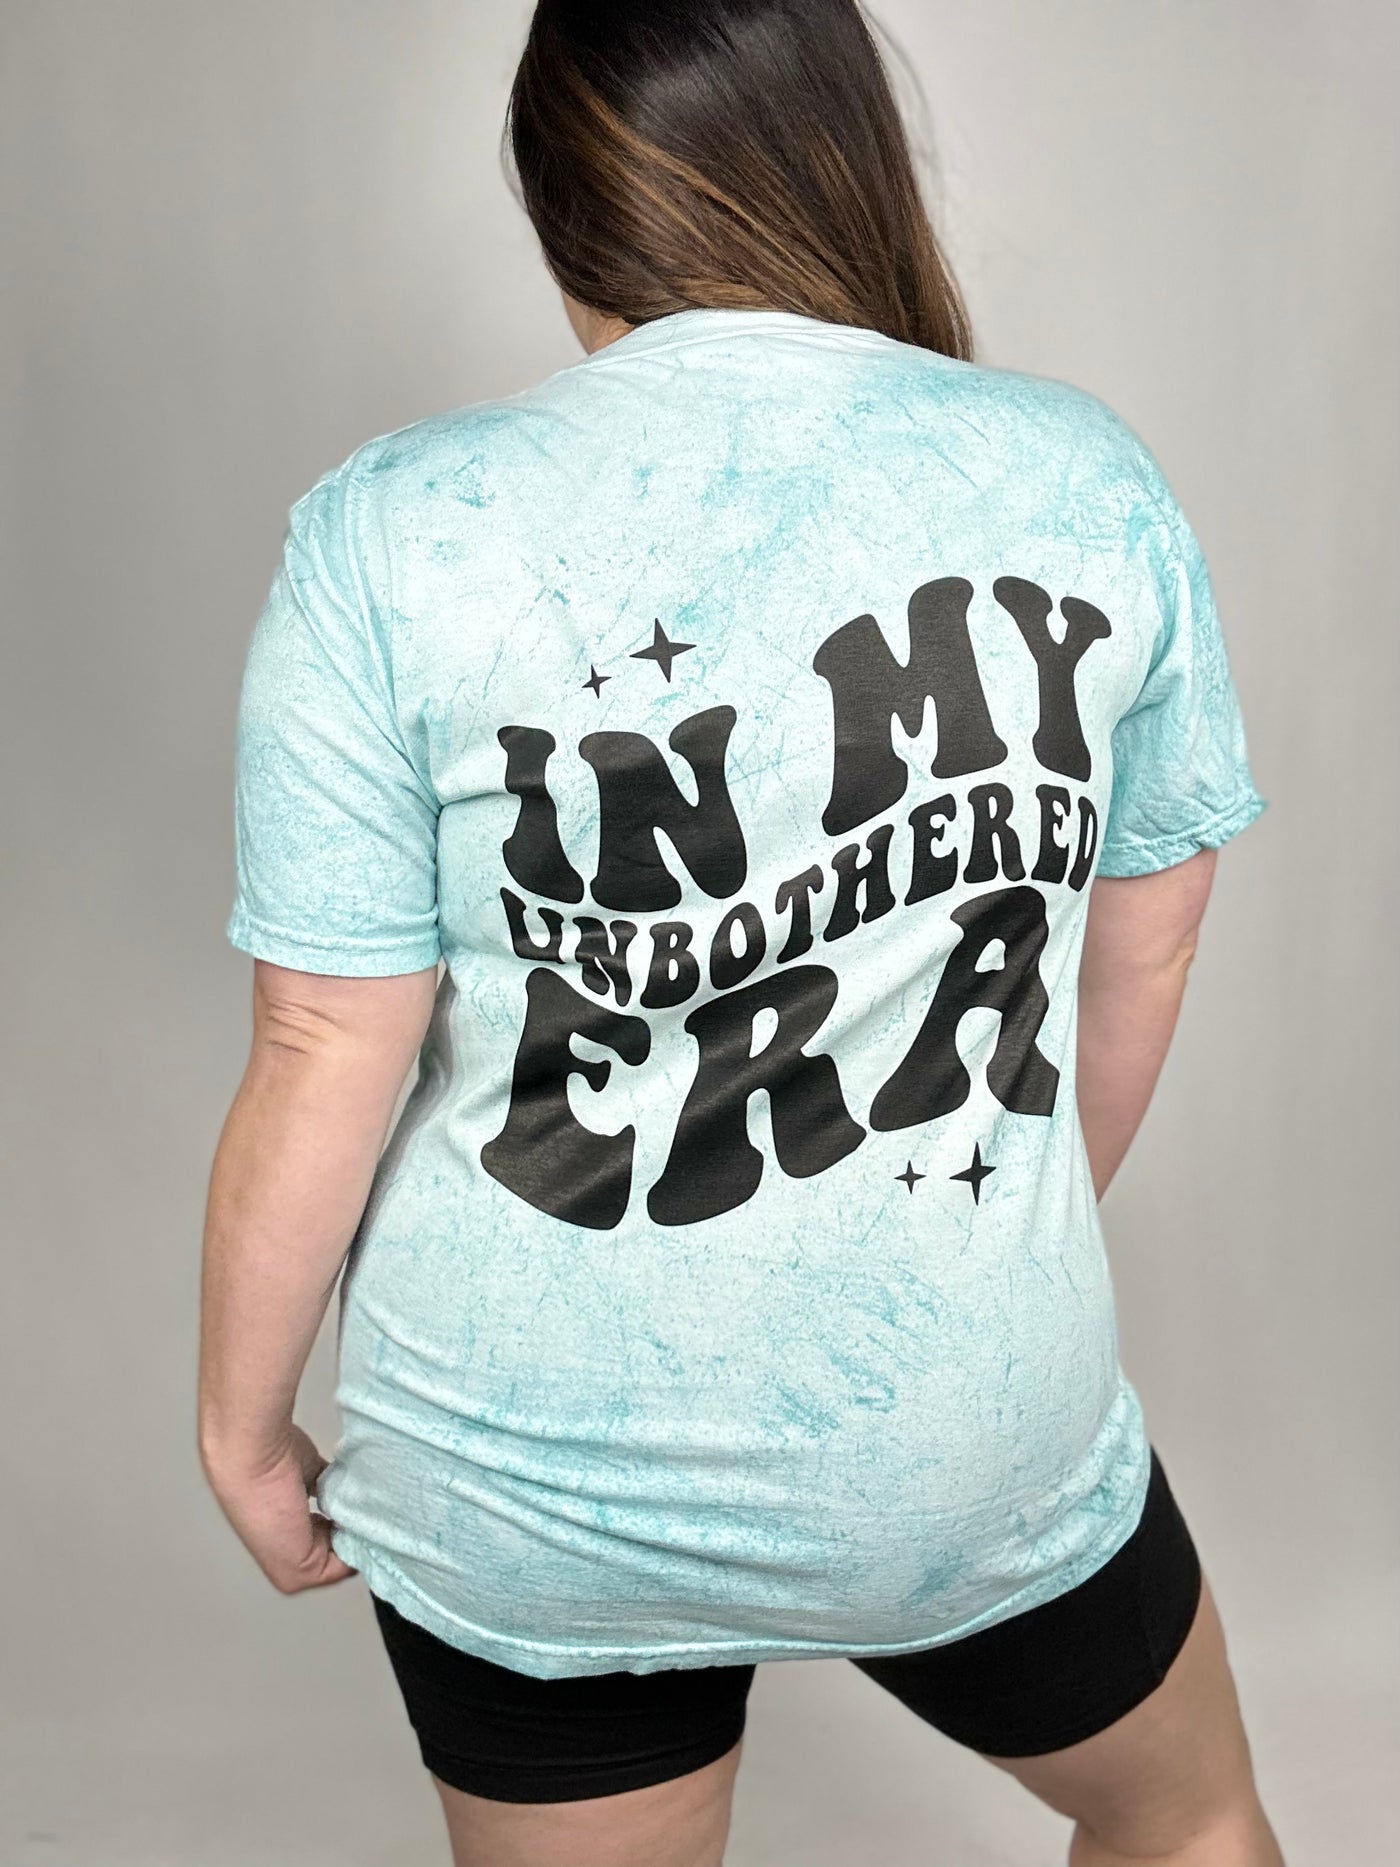 Unbothered Era Graphic Tee